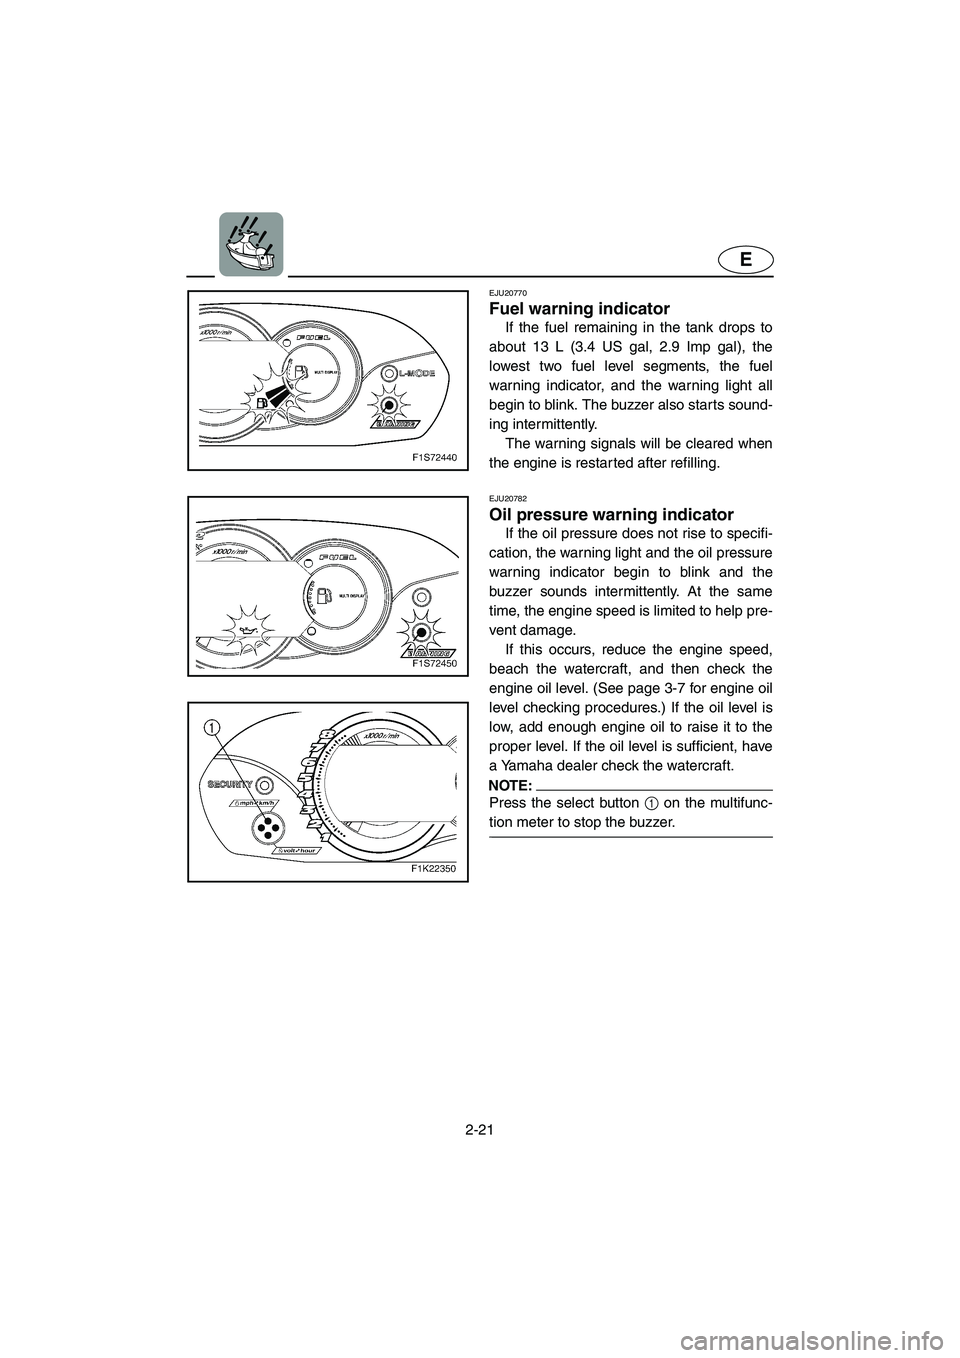 YAMAHA VX 2005  Owners Manual 2-21
E
EJU20770 
Fuel warning indicator 
If the fuel remaining in the tank drops to
about 13 L (3.4 US gal, 2.9 Imp gal), the
lowest two fuel level segments, the fuel
warning indicator, and the warnin